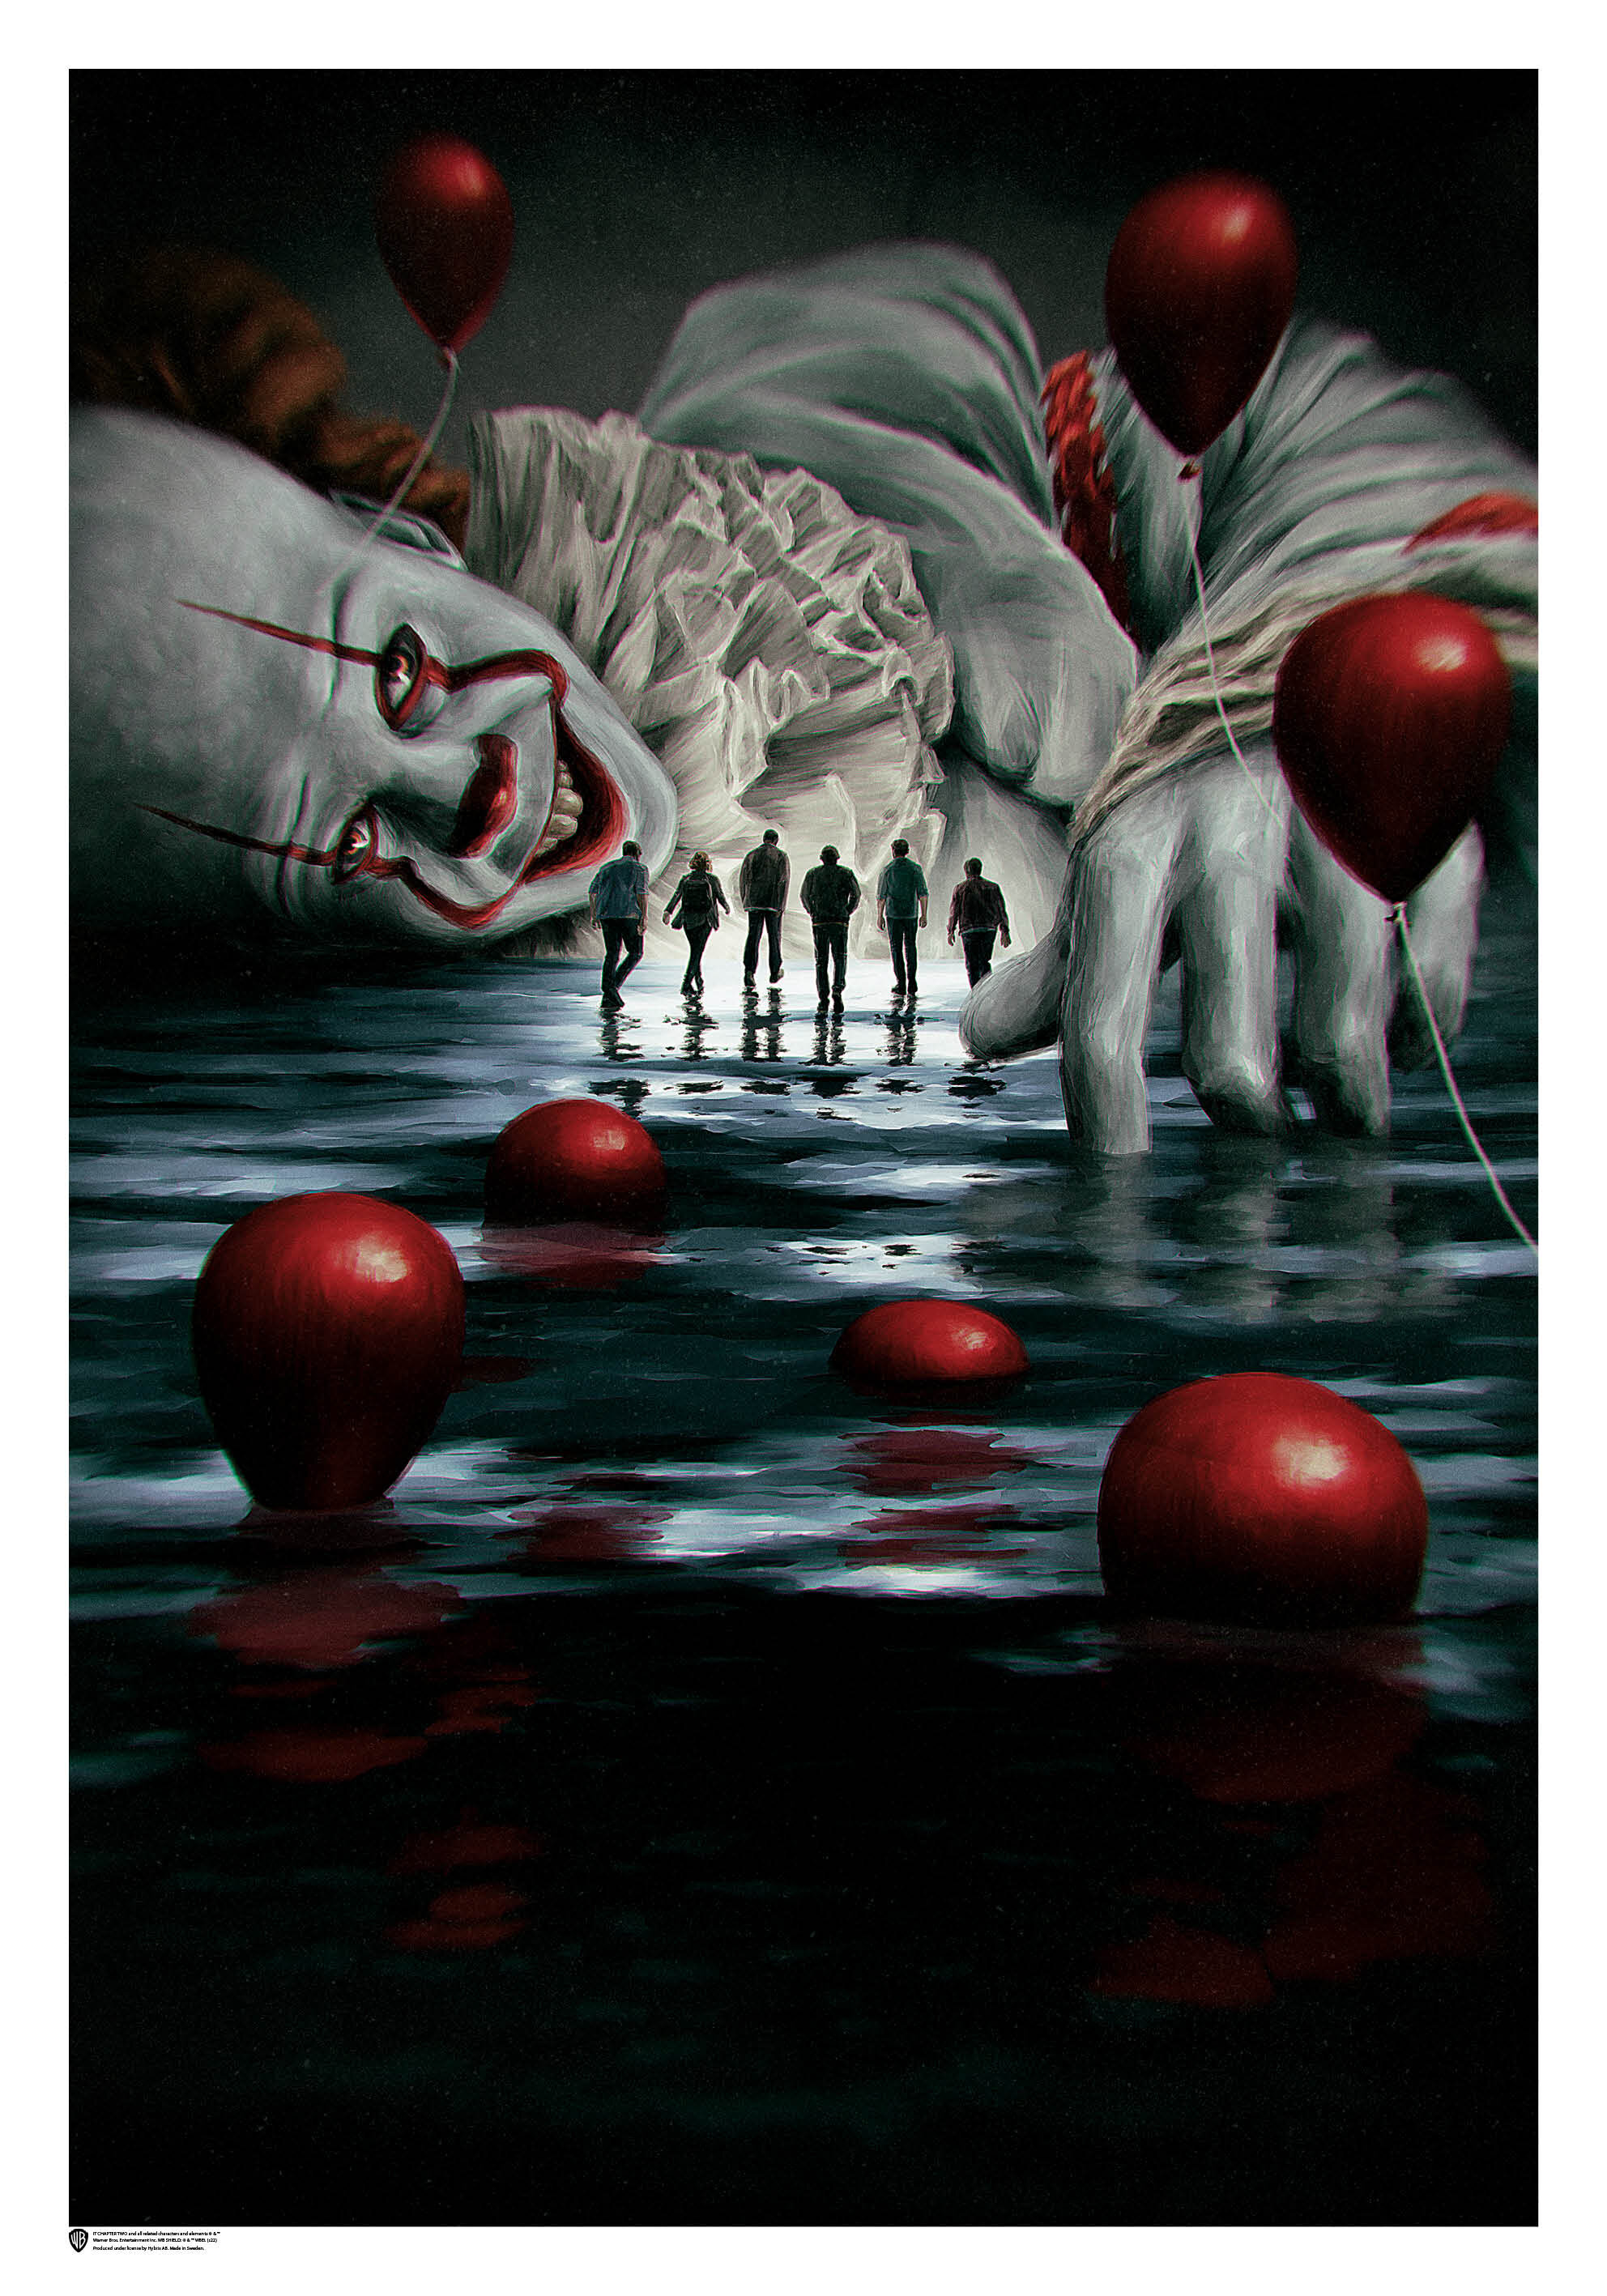 IT - Pennywise & Balloons Poster